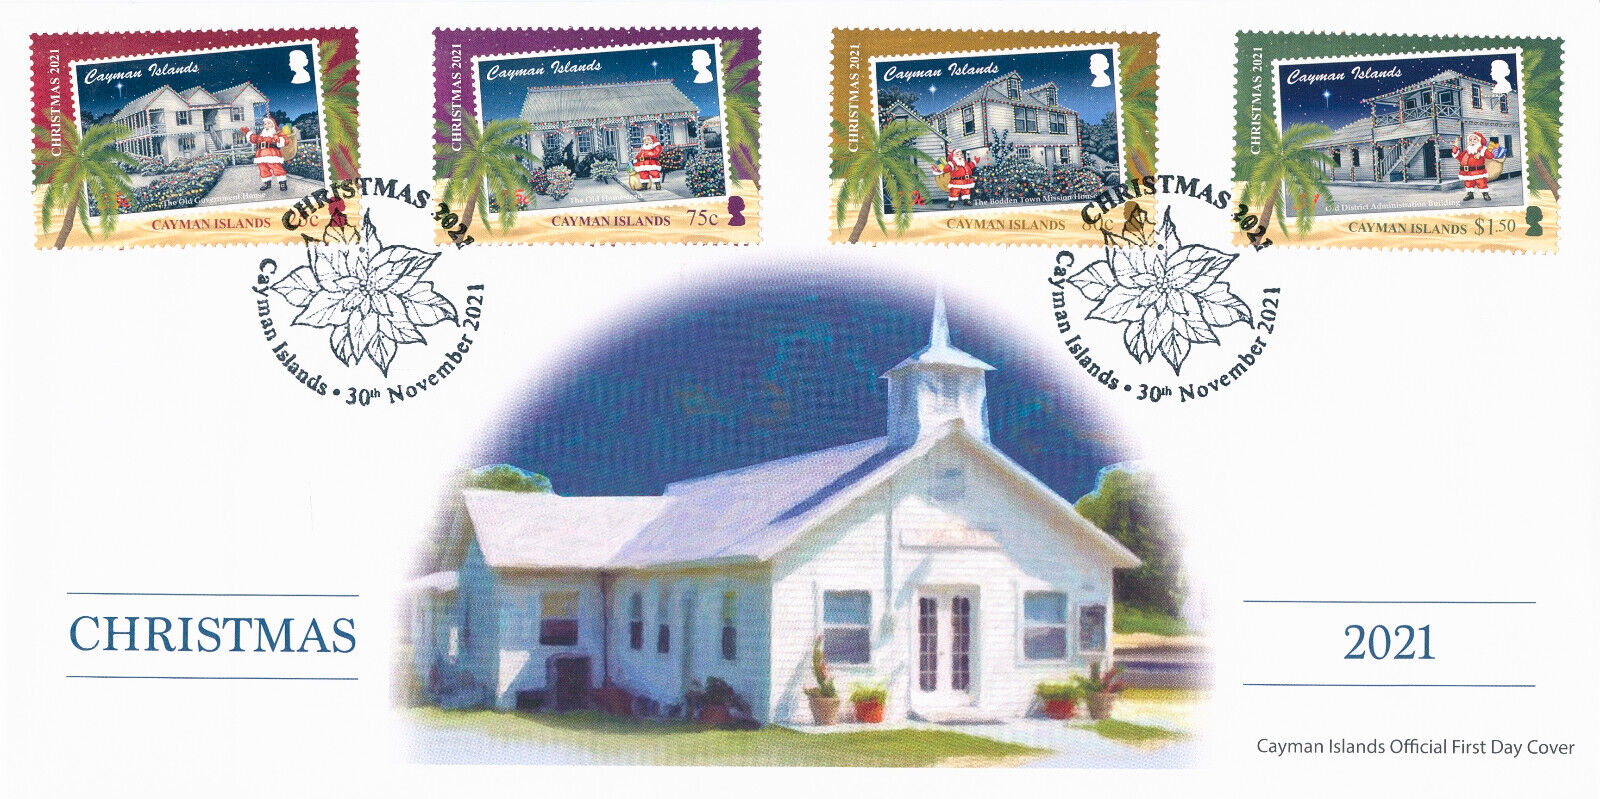 Cayman Islands 2021 FDC Christmas Stamps Santa Houses Architecture 4v Set